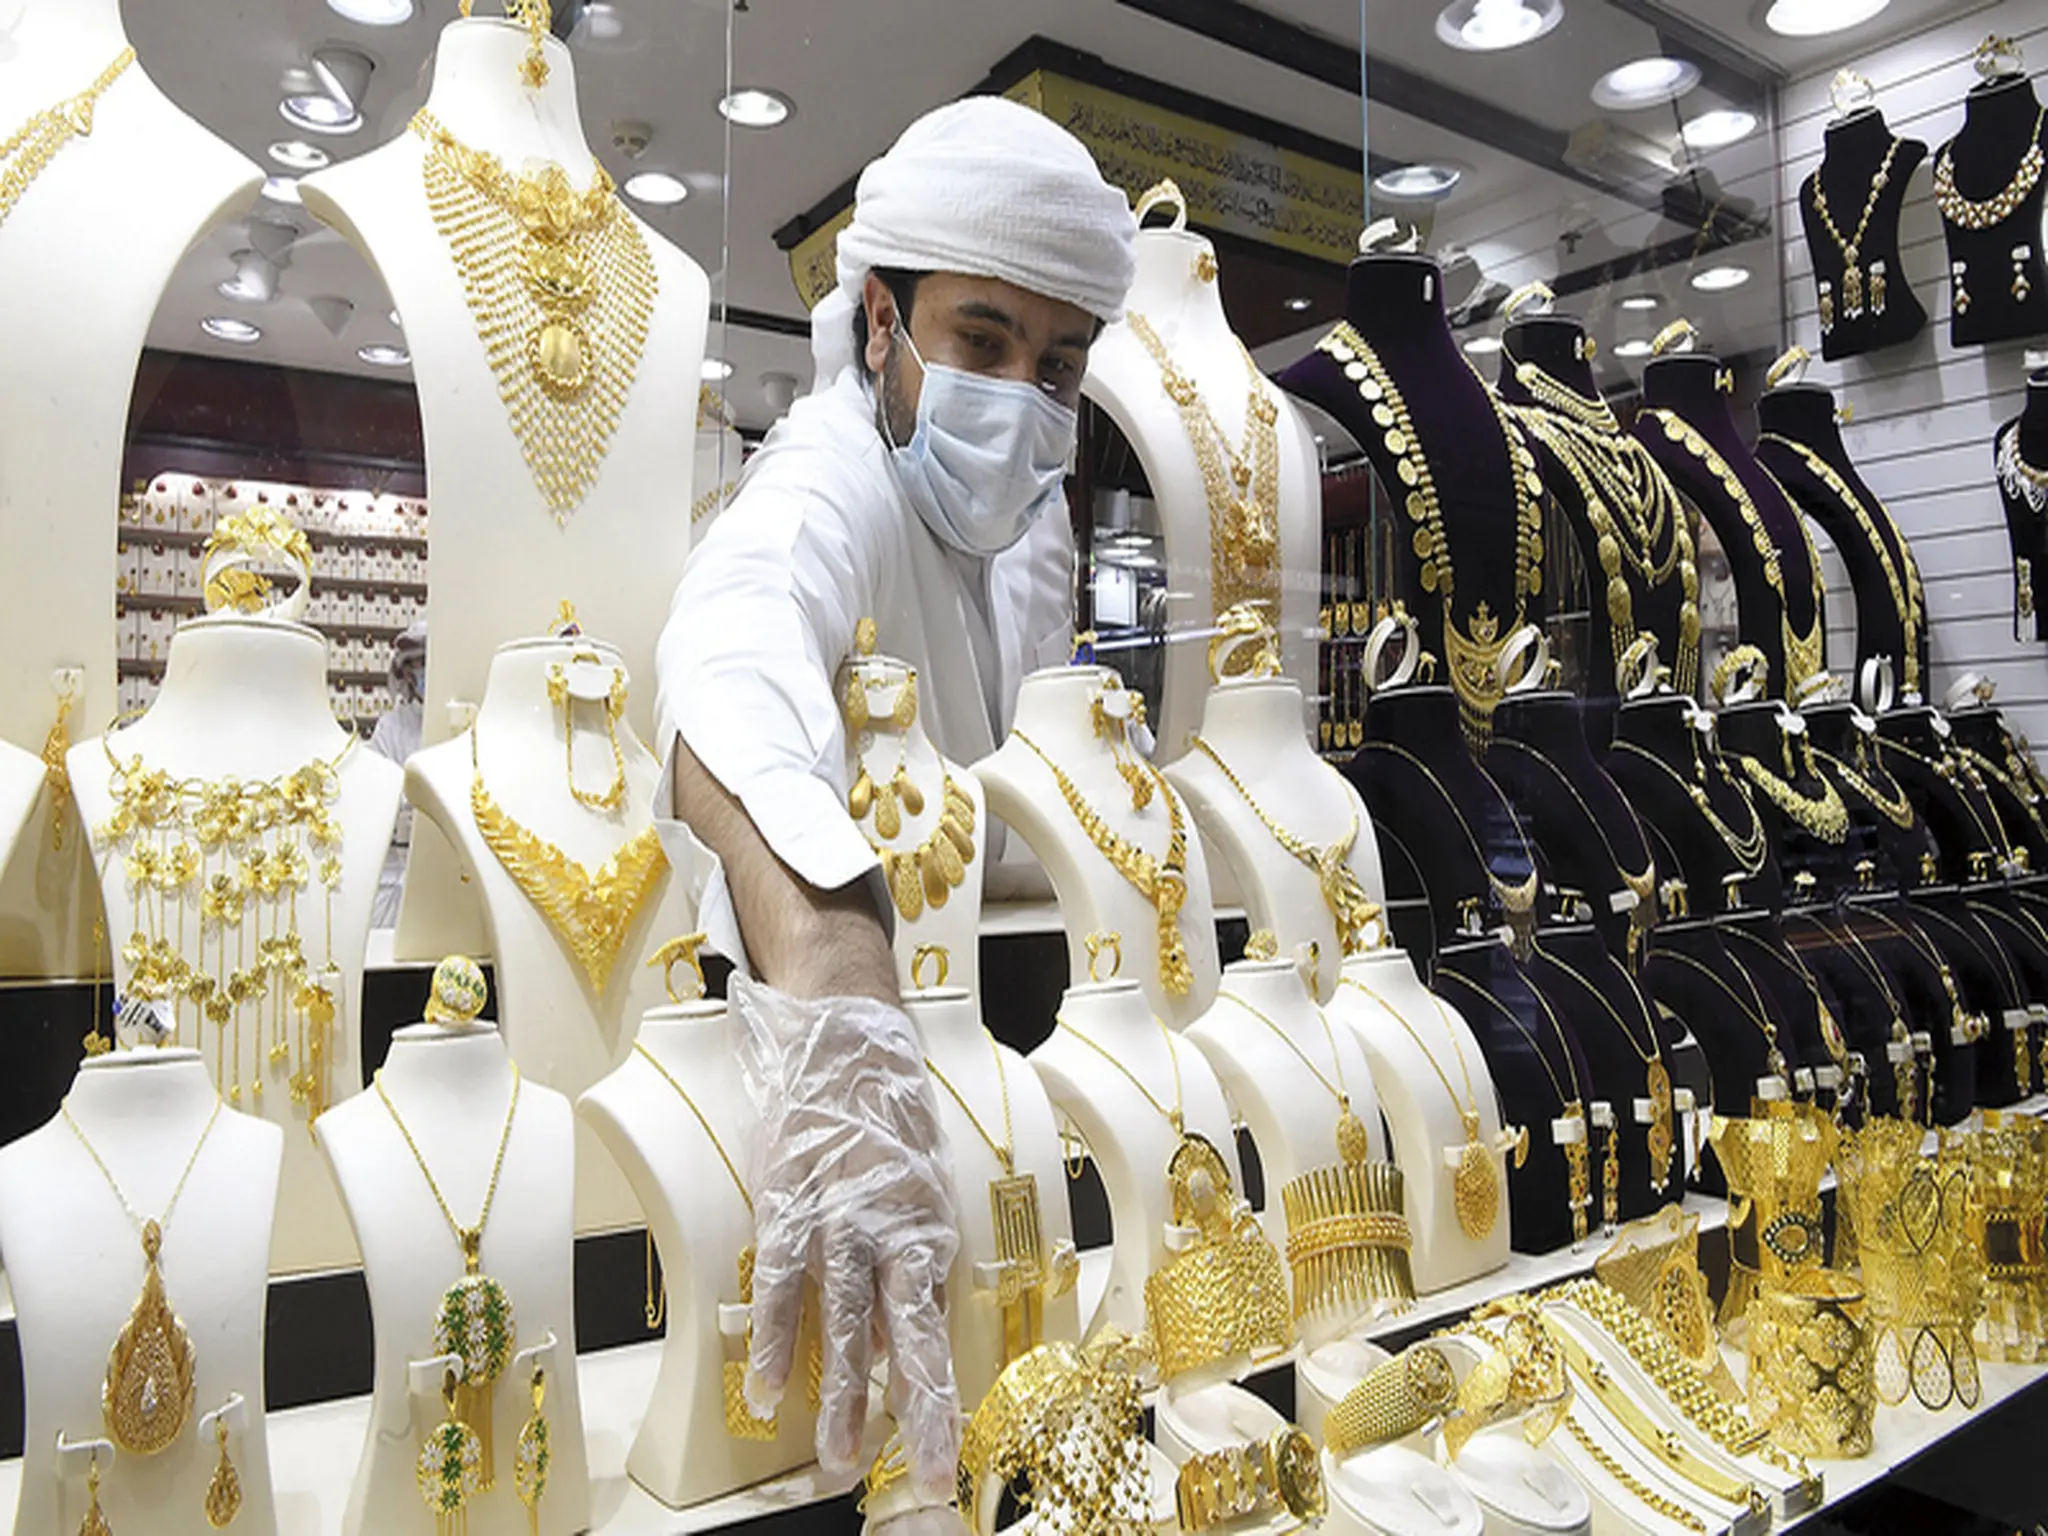 Urgent Dubai: a decrease in the price of gold and an increase in the percentage of sales